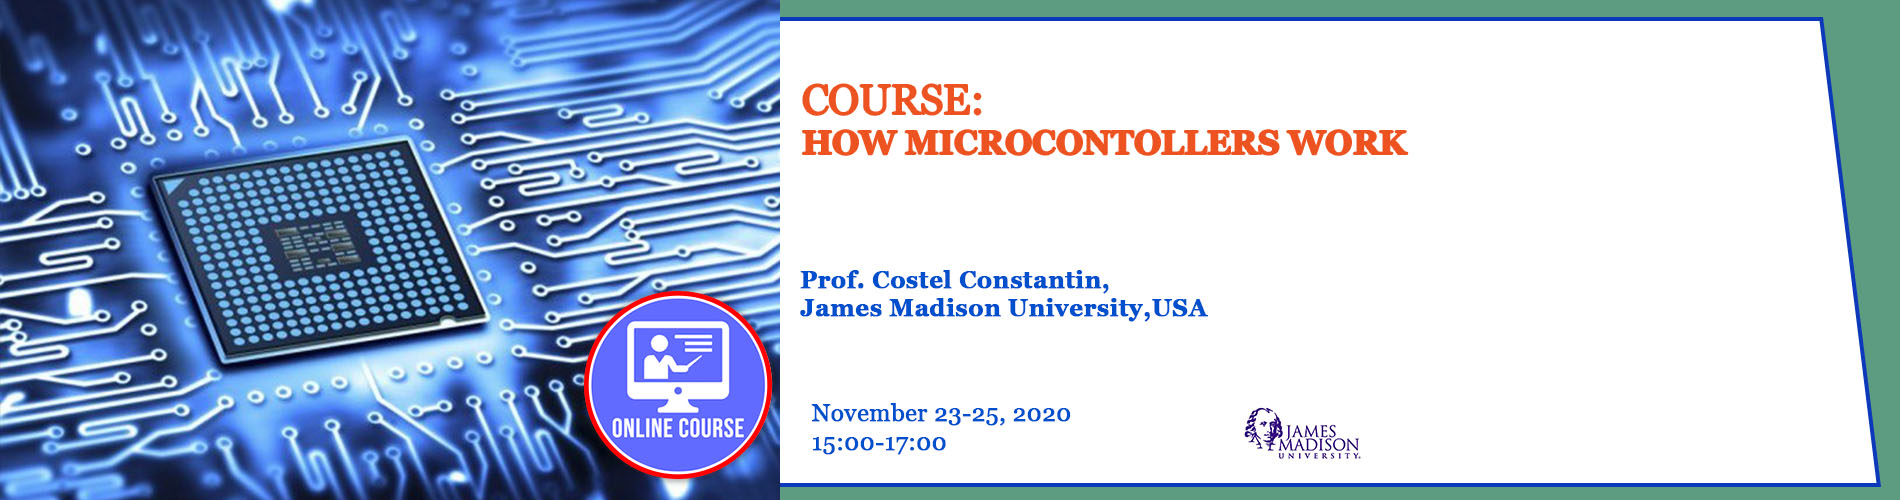 23.11.2020-how microcontrollers work